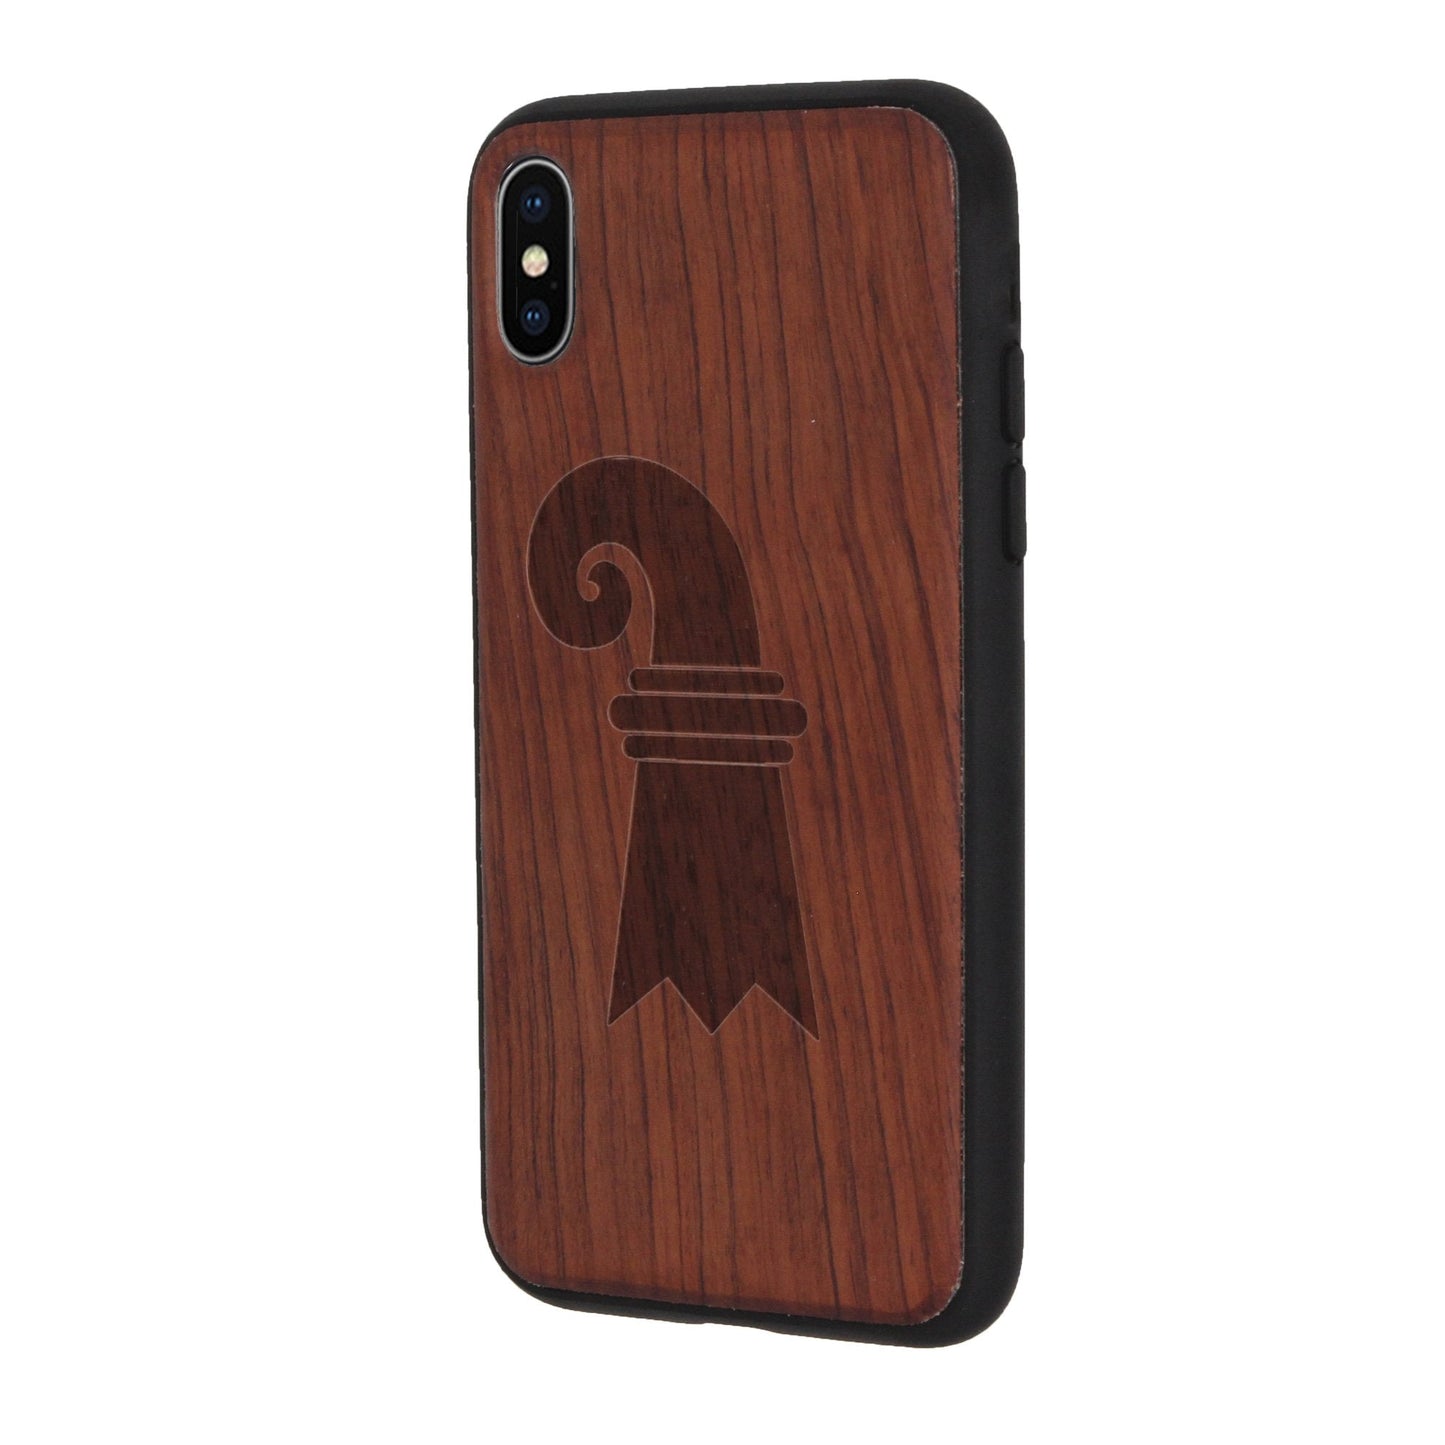 Baslerstab Eden rosewood case for iPhone XS Max